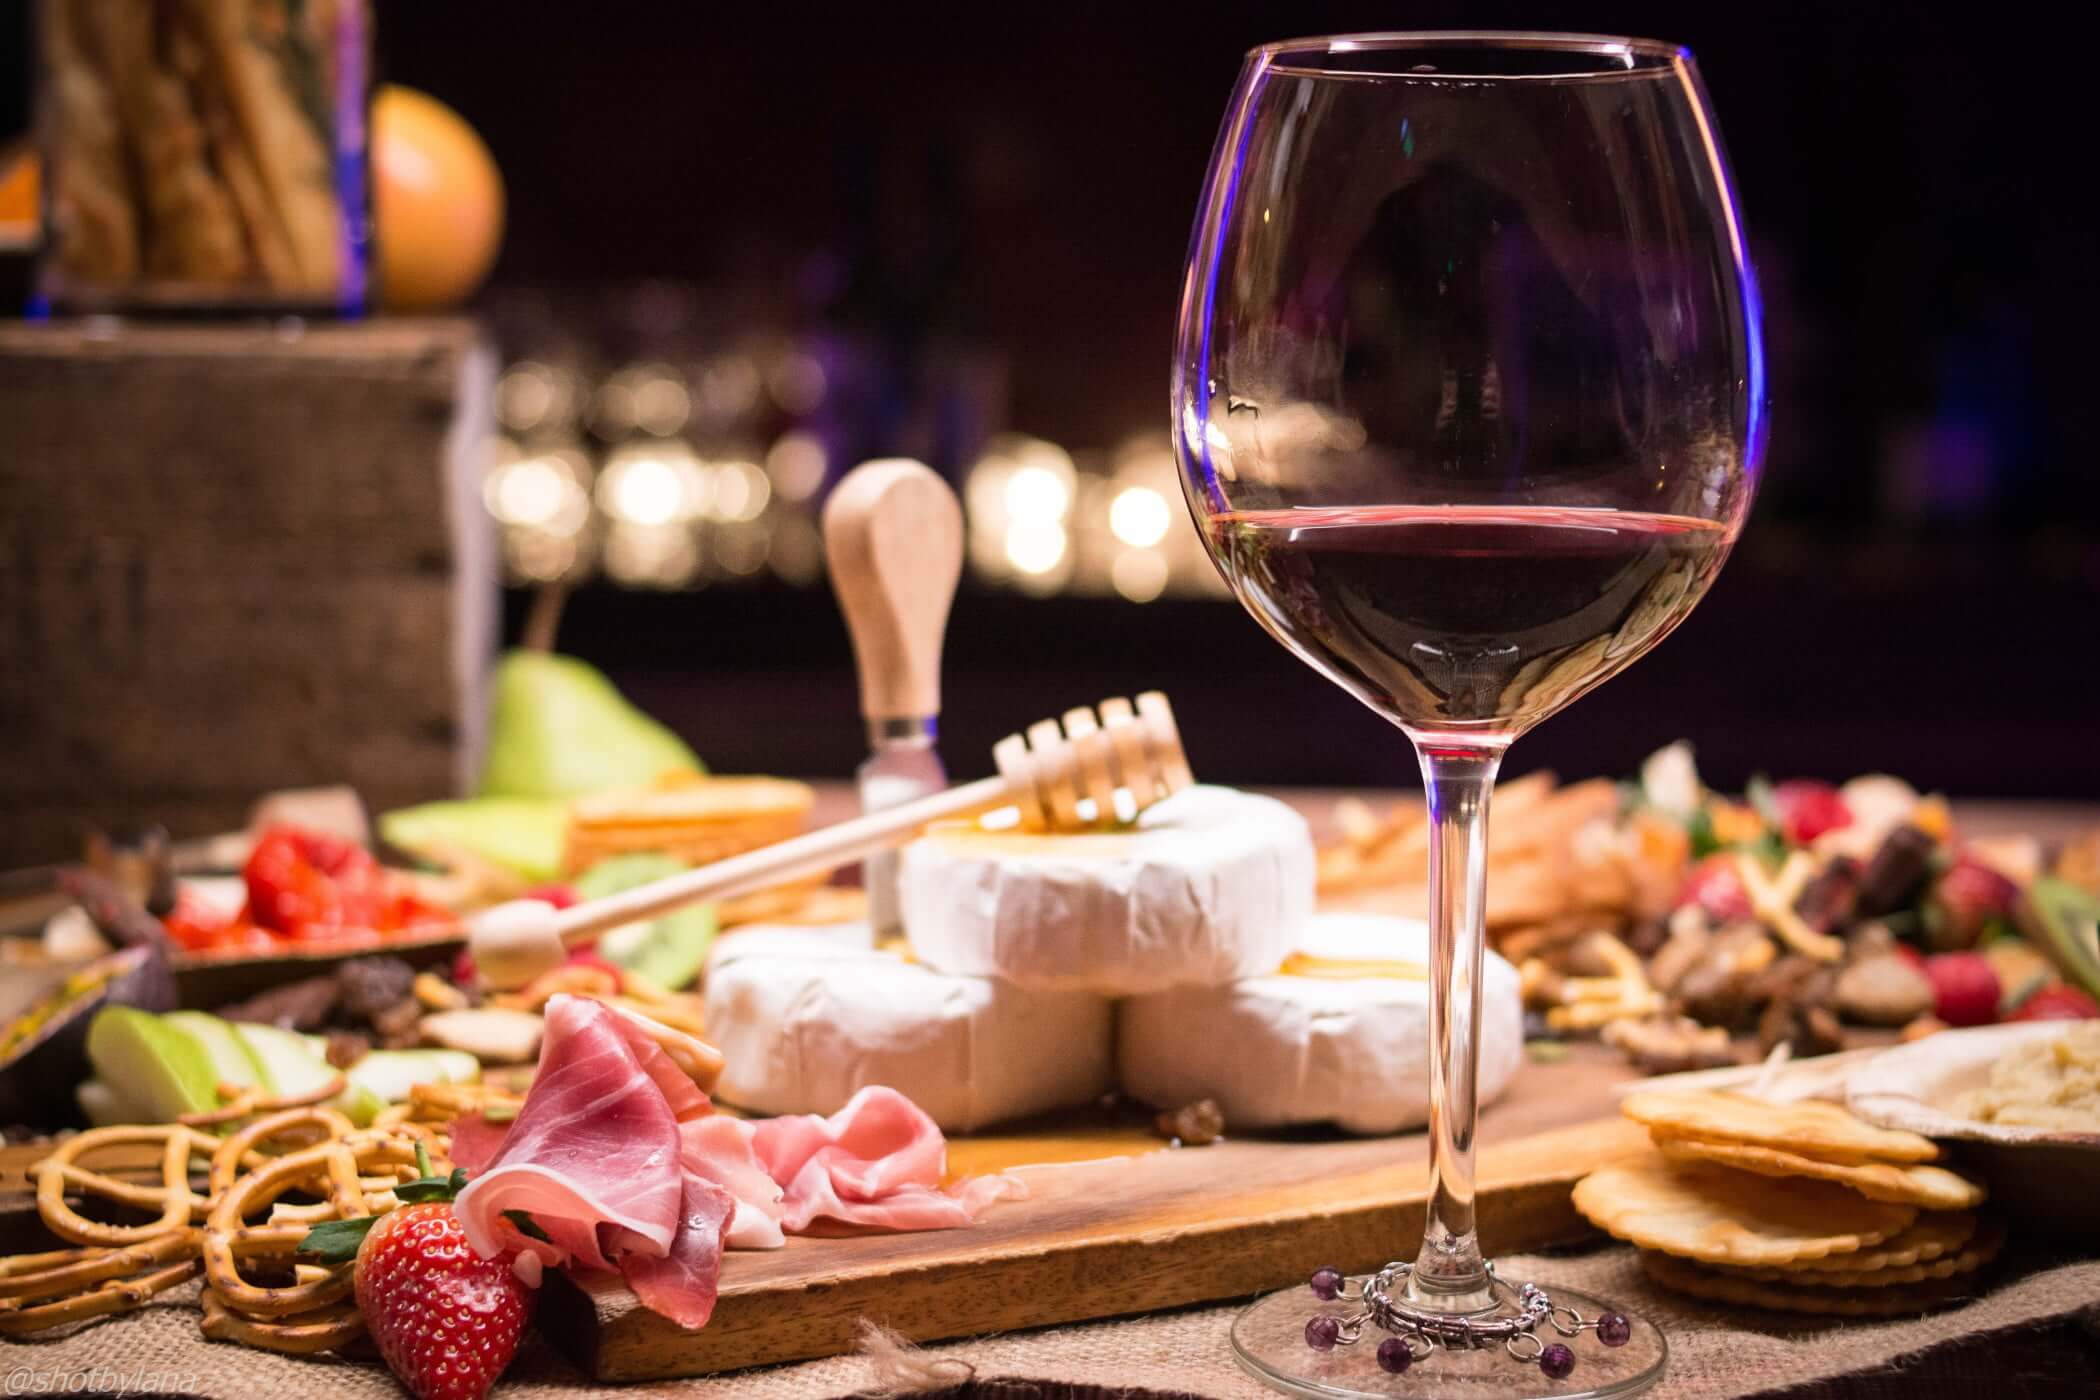 2 Killing Tips to Learn To Pair Wine And Cheese to Make Your Friends Love You More